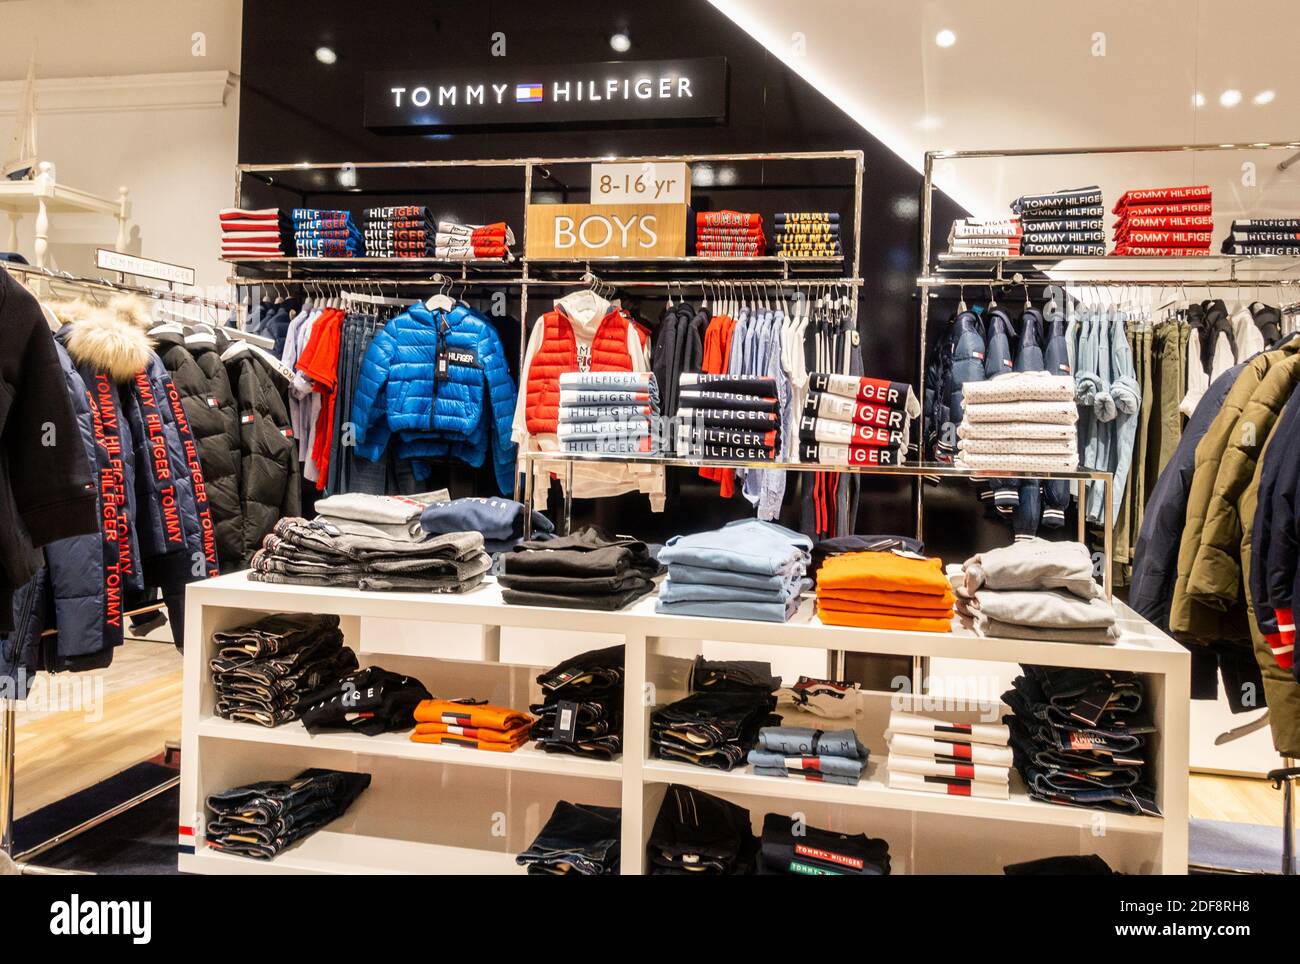 Tommy Hilfiger Store Display High 